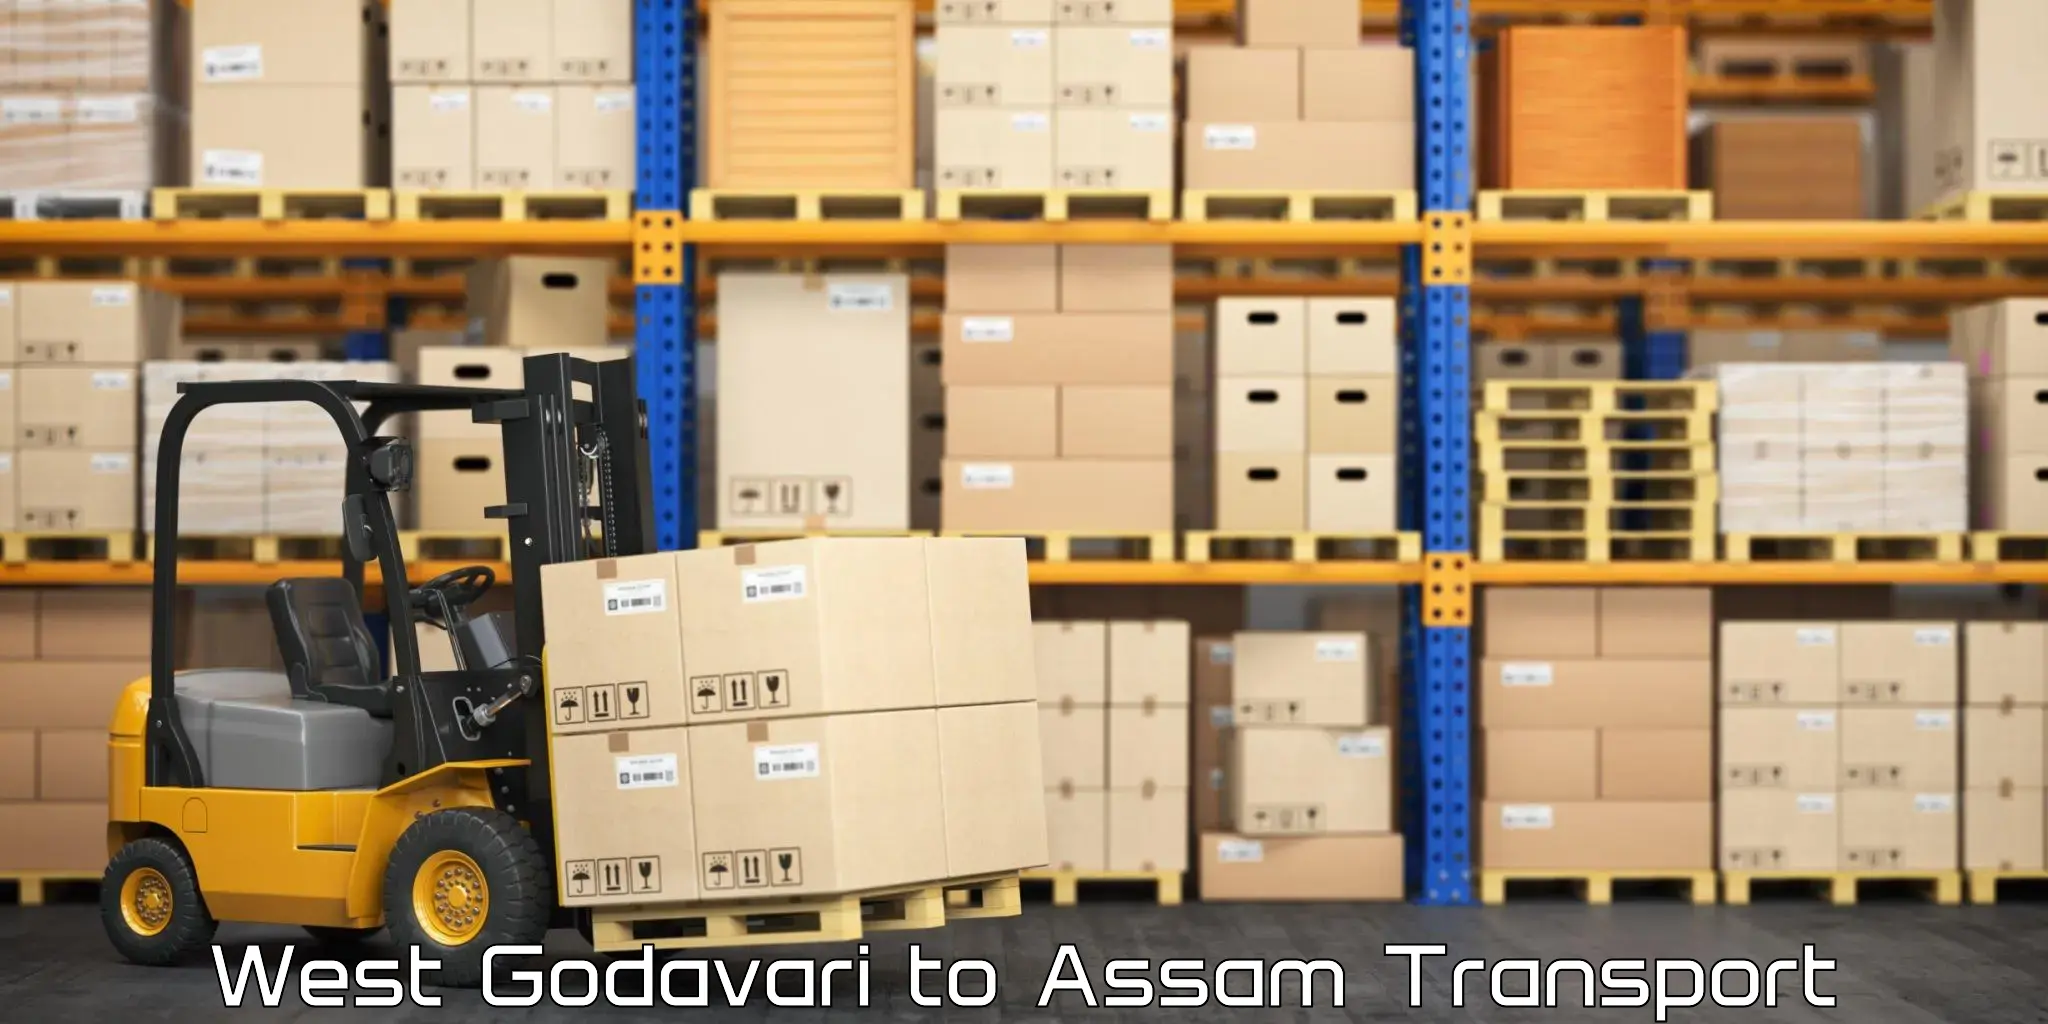 Container transport service West Godavari to Sonitpur